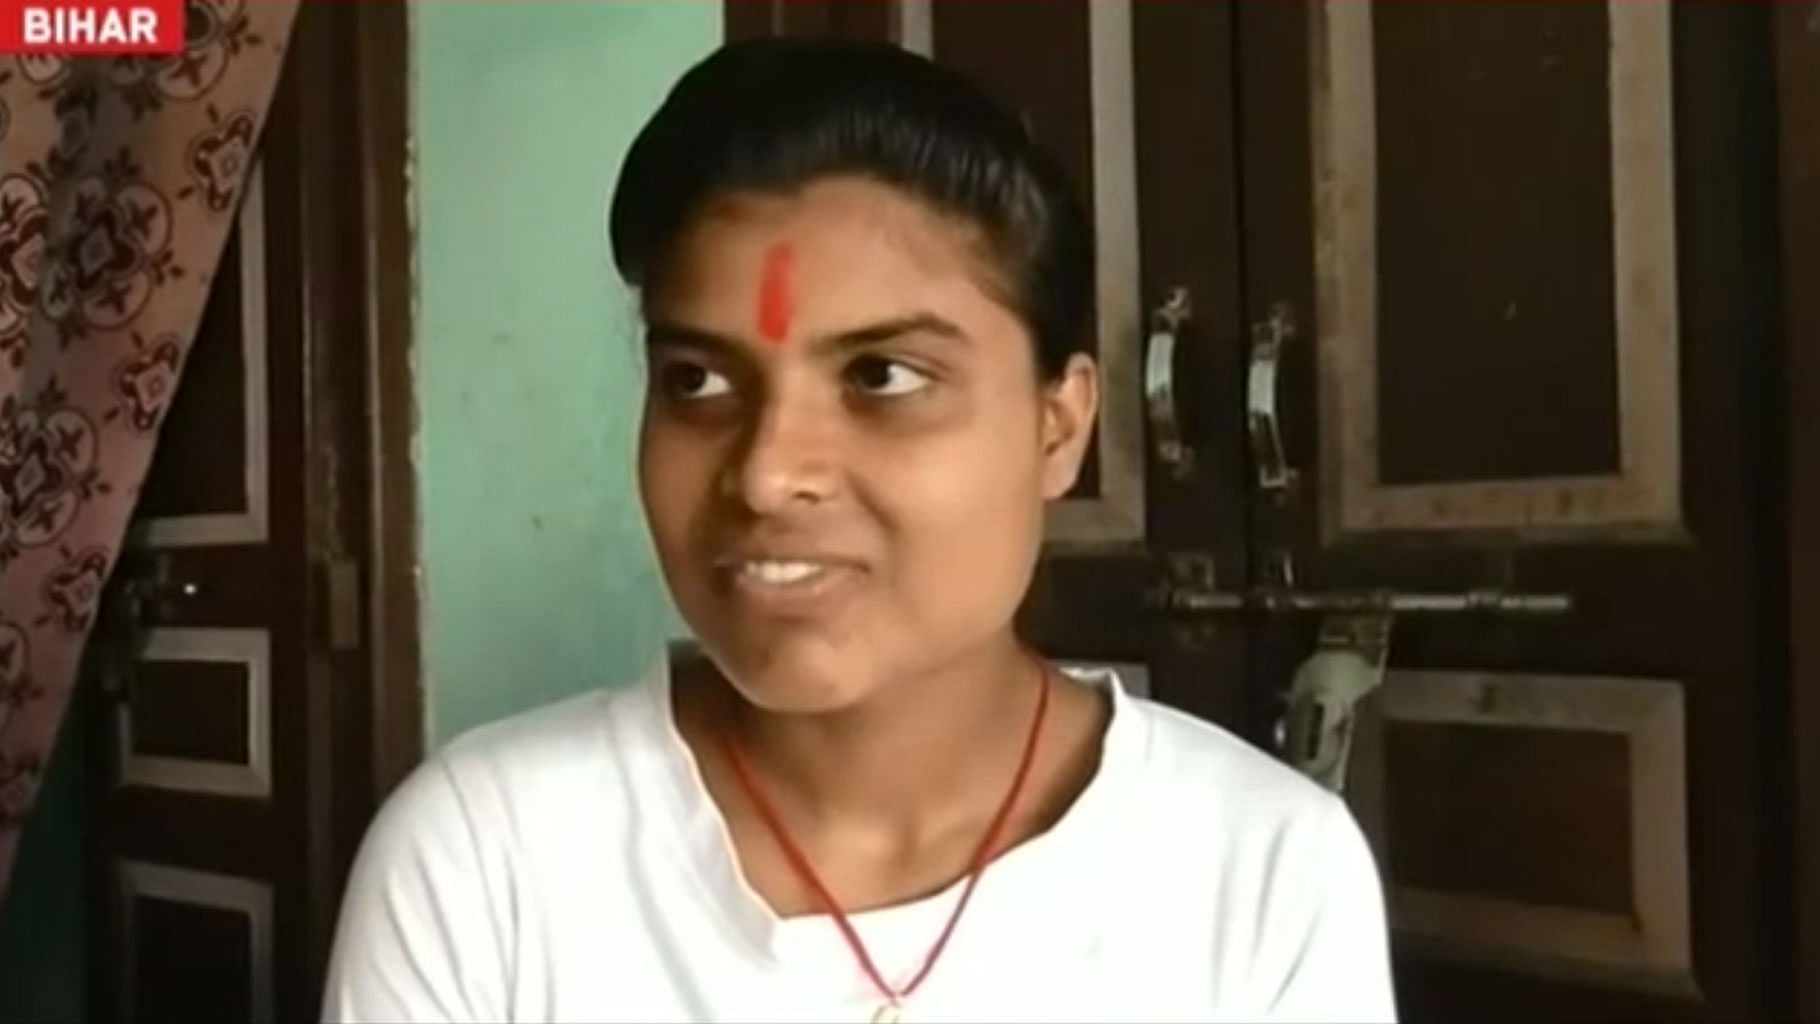 Ruby Rai has topped Class 12 subject of Political Science in Bihar this year. (Photo Courtesy: Twitter/@IndiaToday)